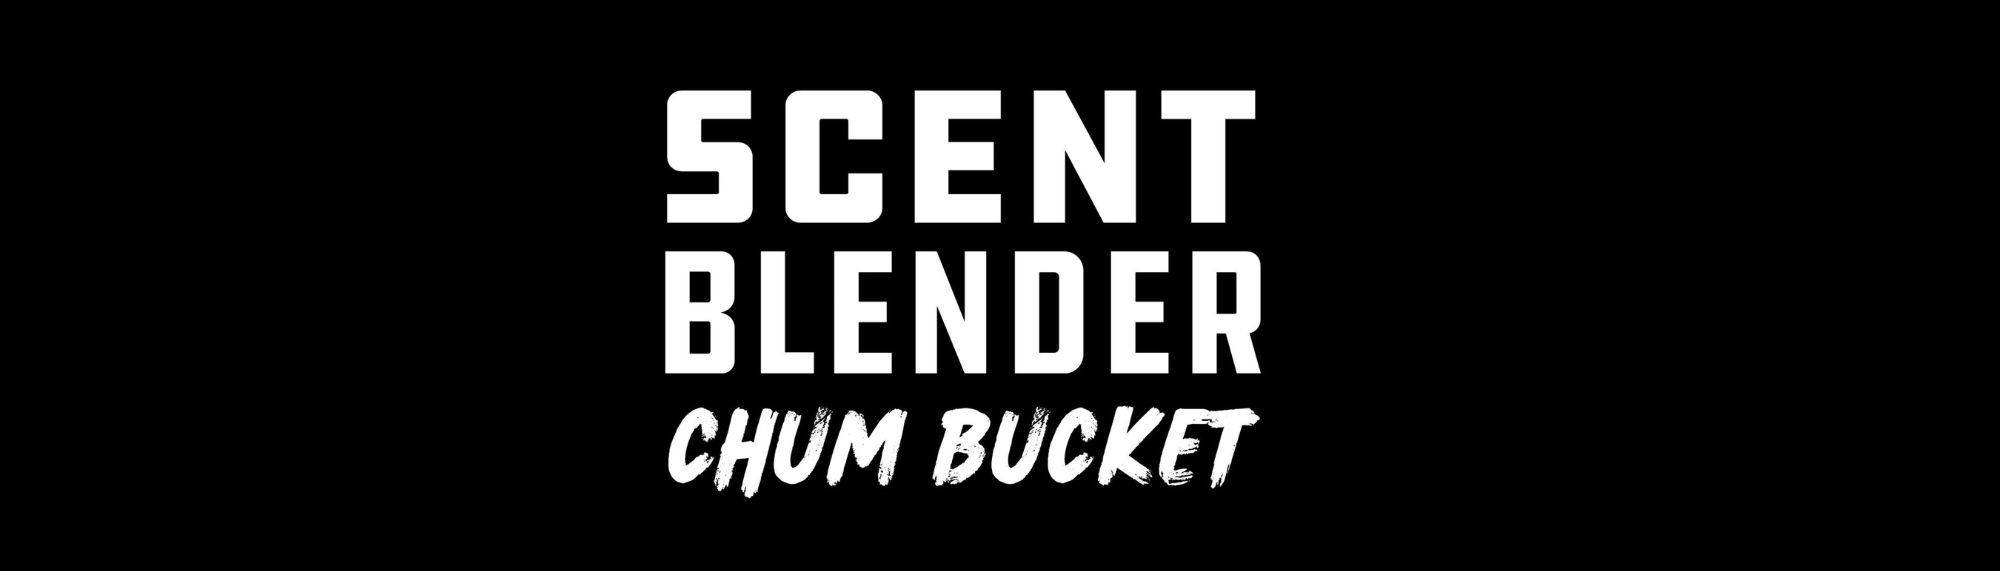 WTF is a Scent Blender? 